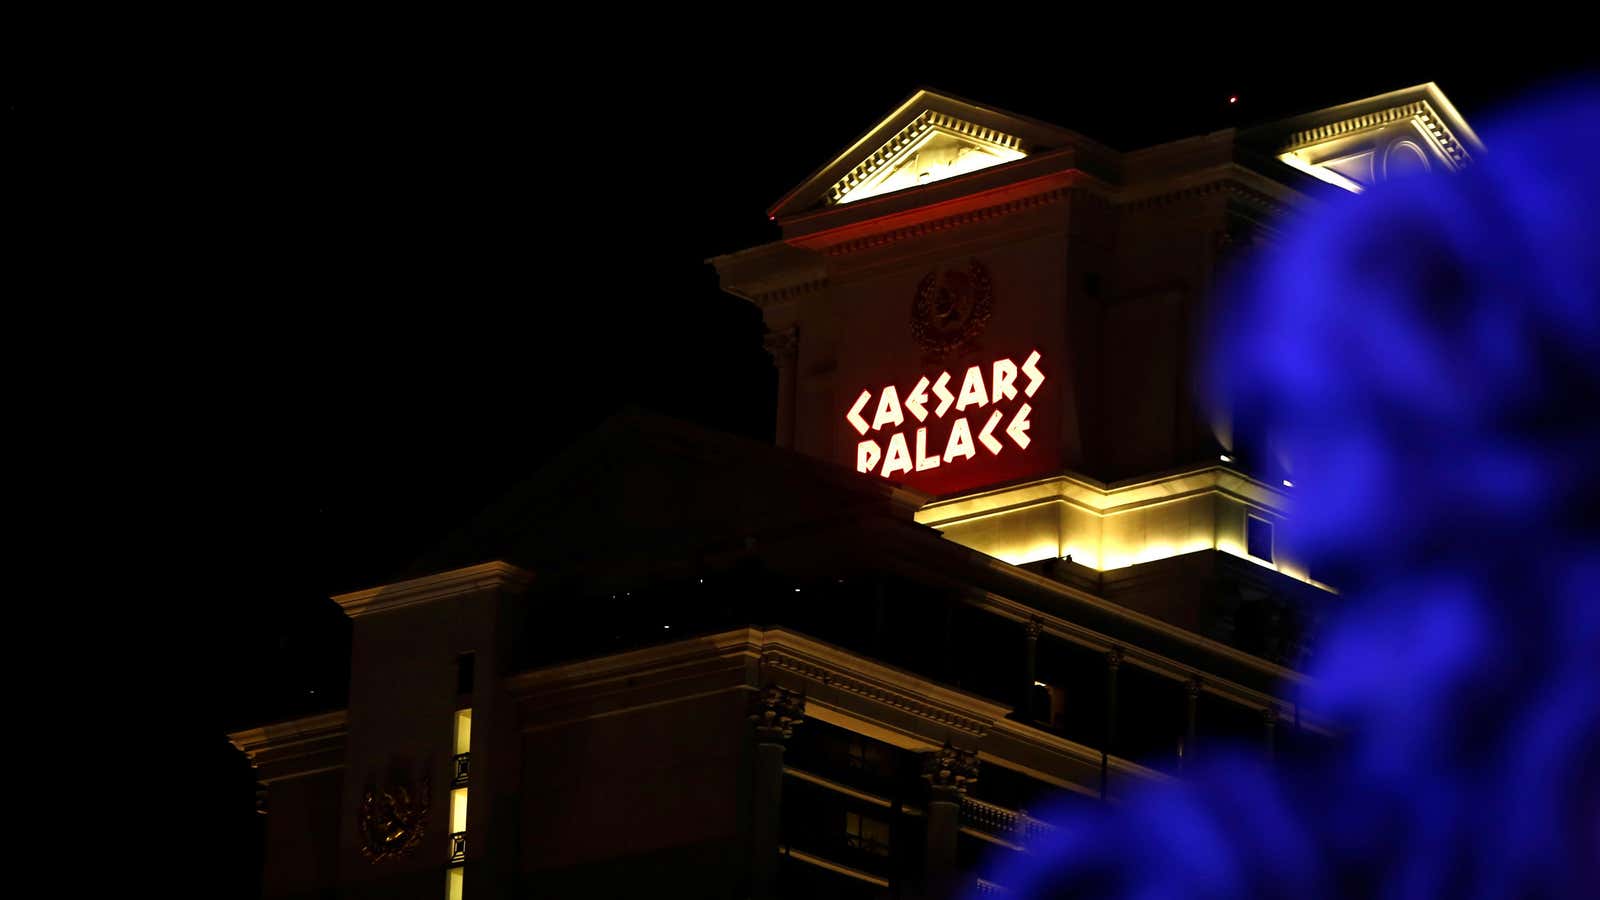 The $17 billion purchase of Caesars Palace by two private equity firms was a bad bet.